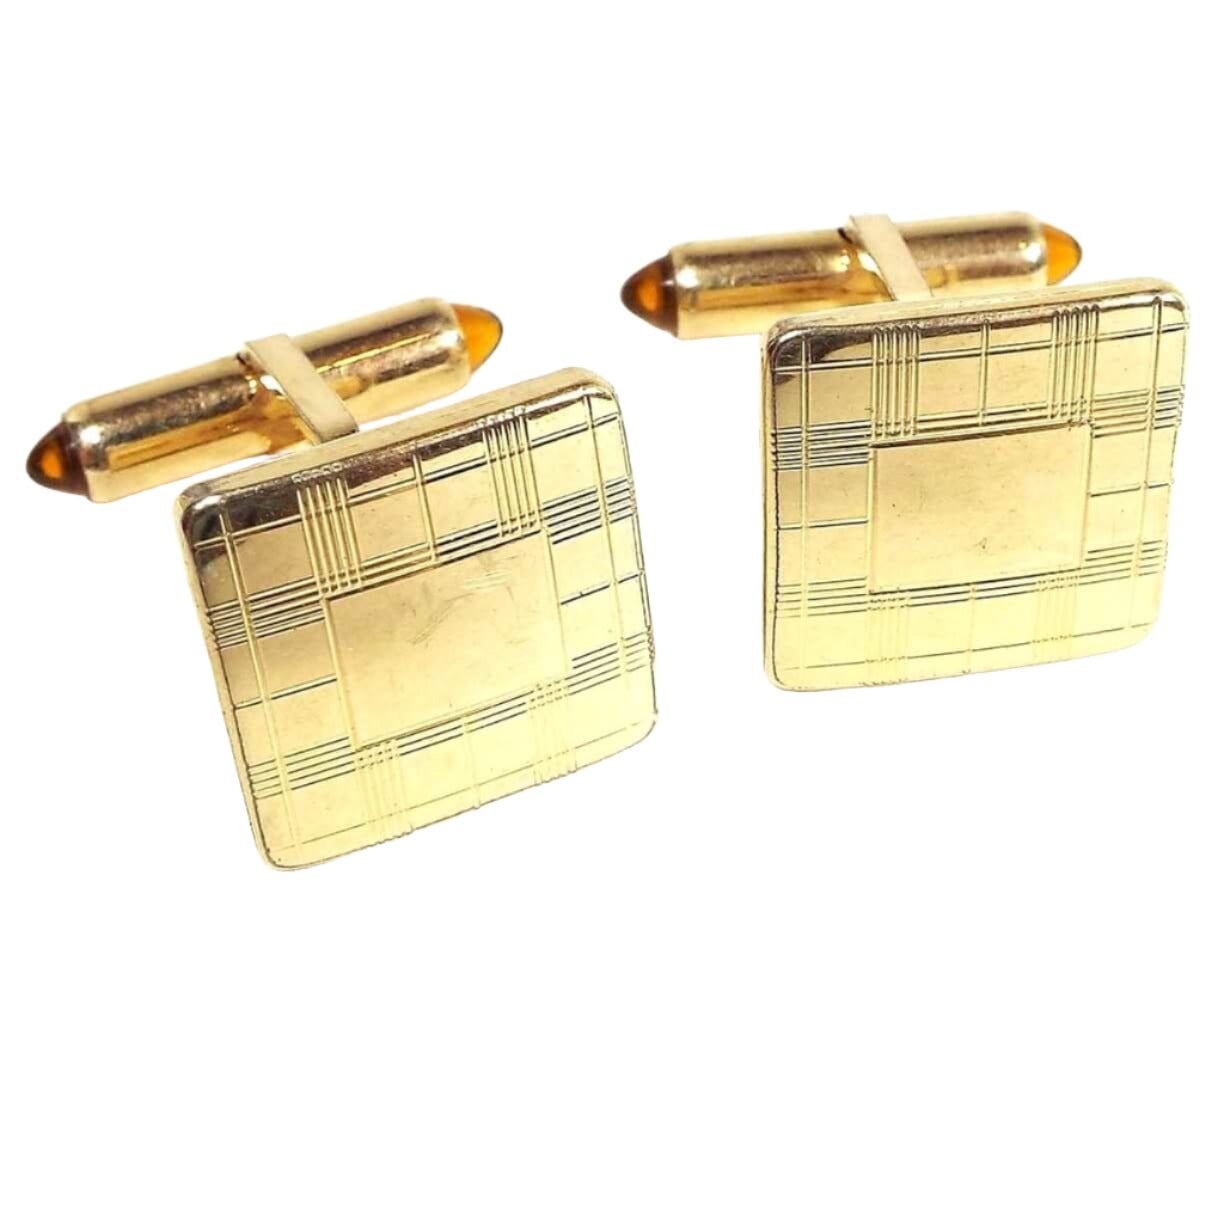 Front view of the Mid Century vintage Krementz cufflinks. They are square and gold tone in color with a lightly etched plaid like pattern on the front. The backs have domed orange lucite caps on each side of the levers.